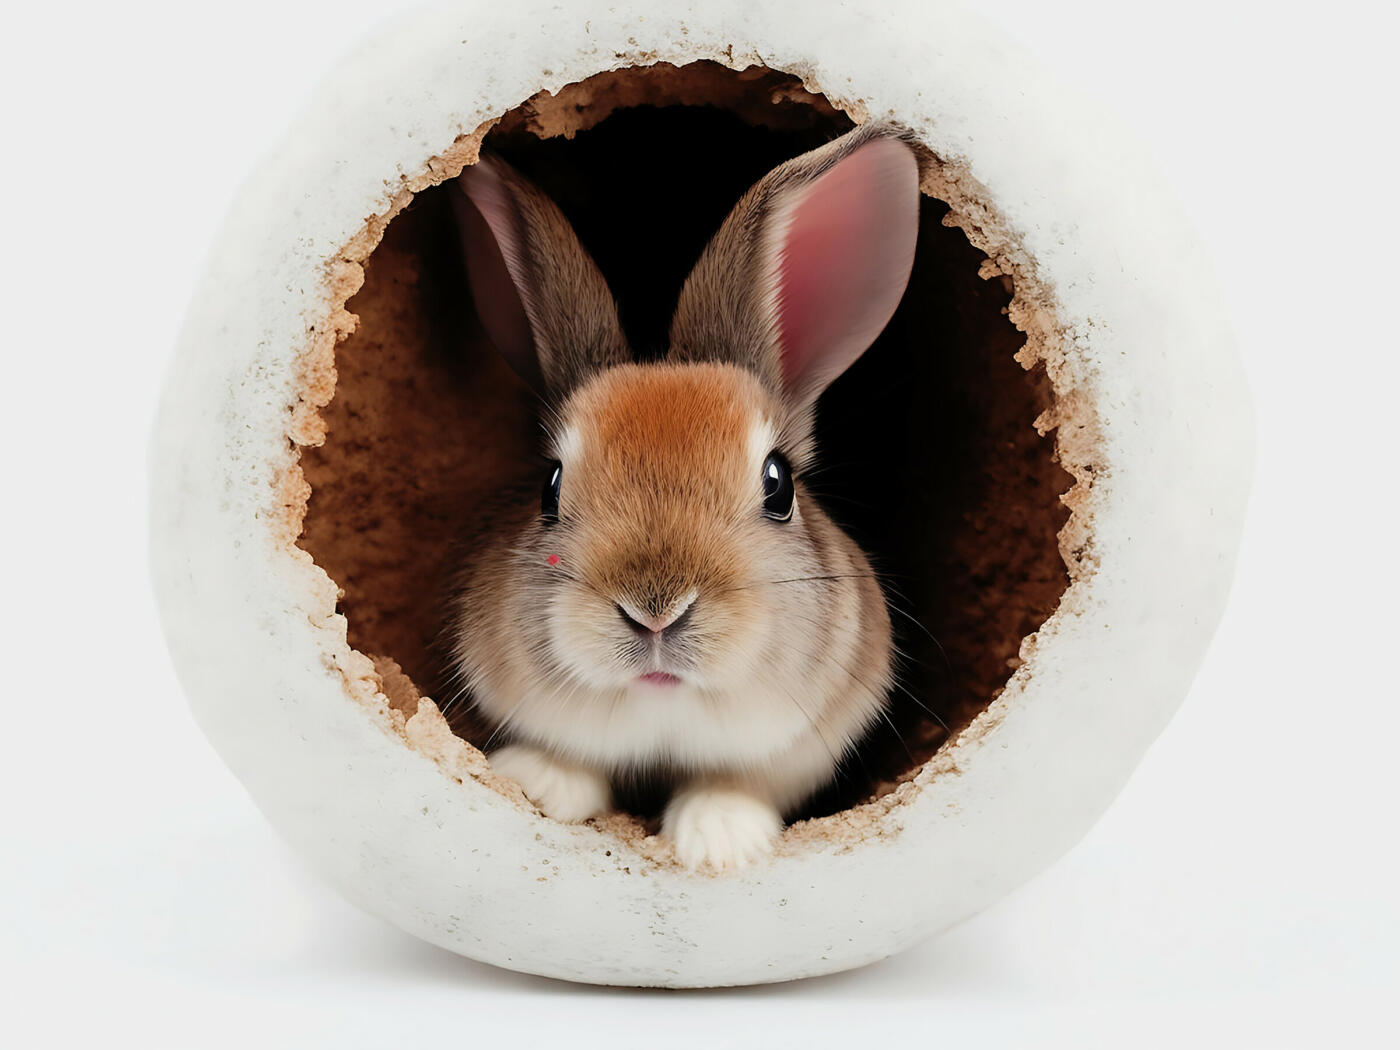 Playtime for Long-Ears: Safe and Stimulating Toys for Rabbits